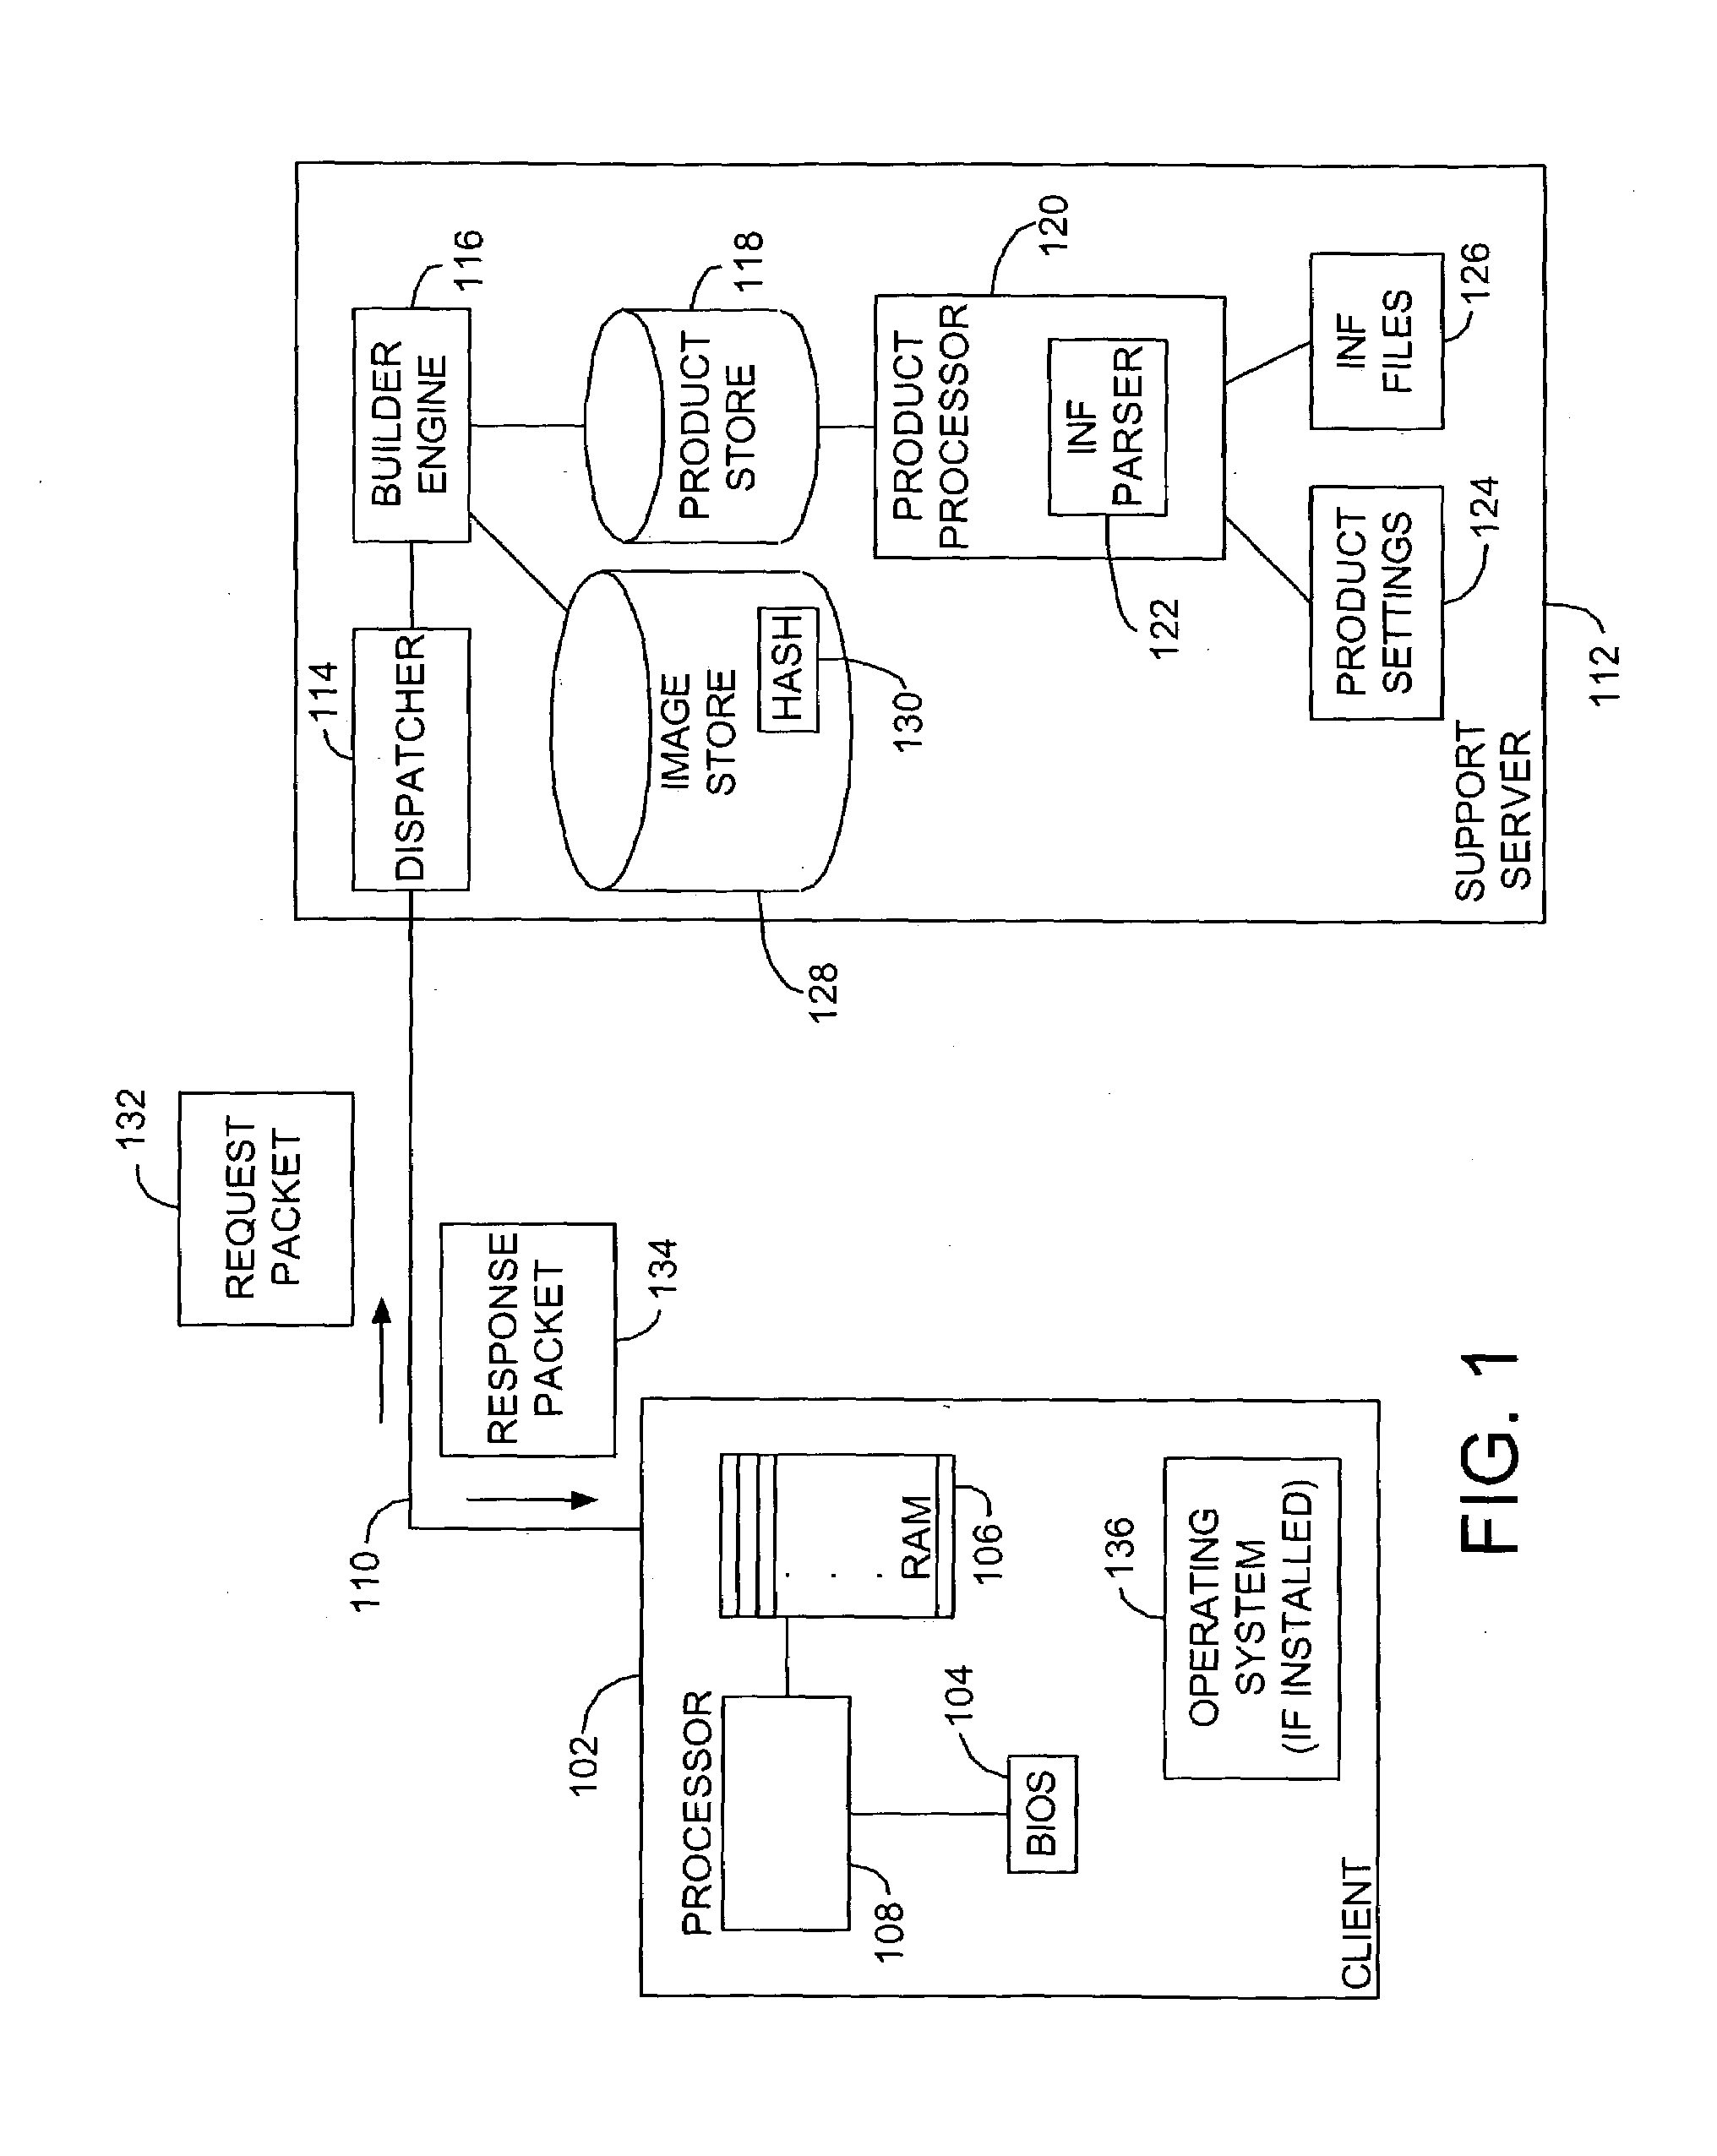 System and method for custom installation of an operating system on a remote client